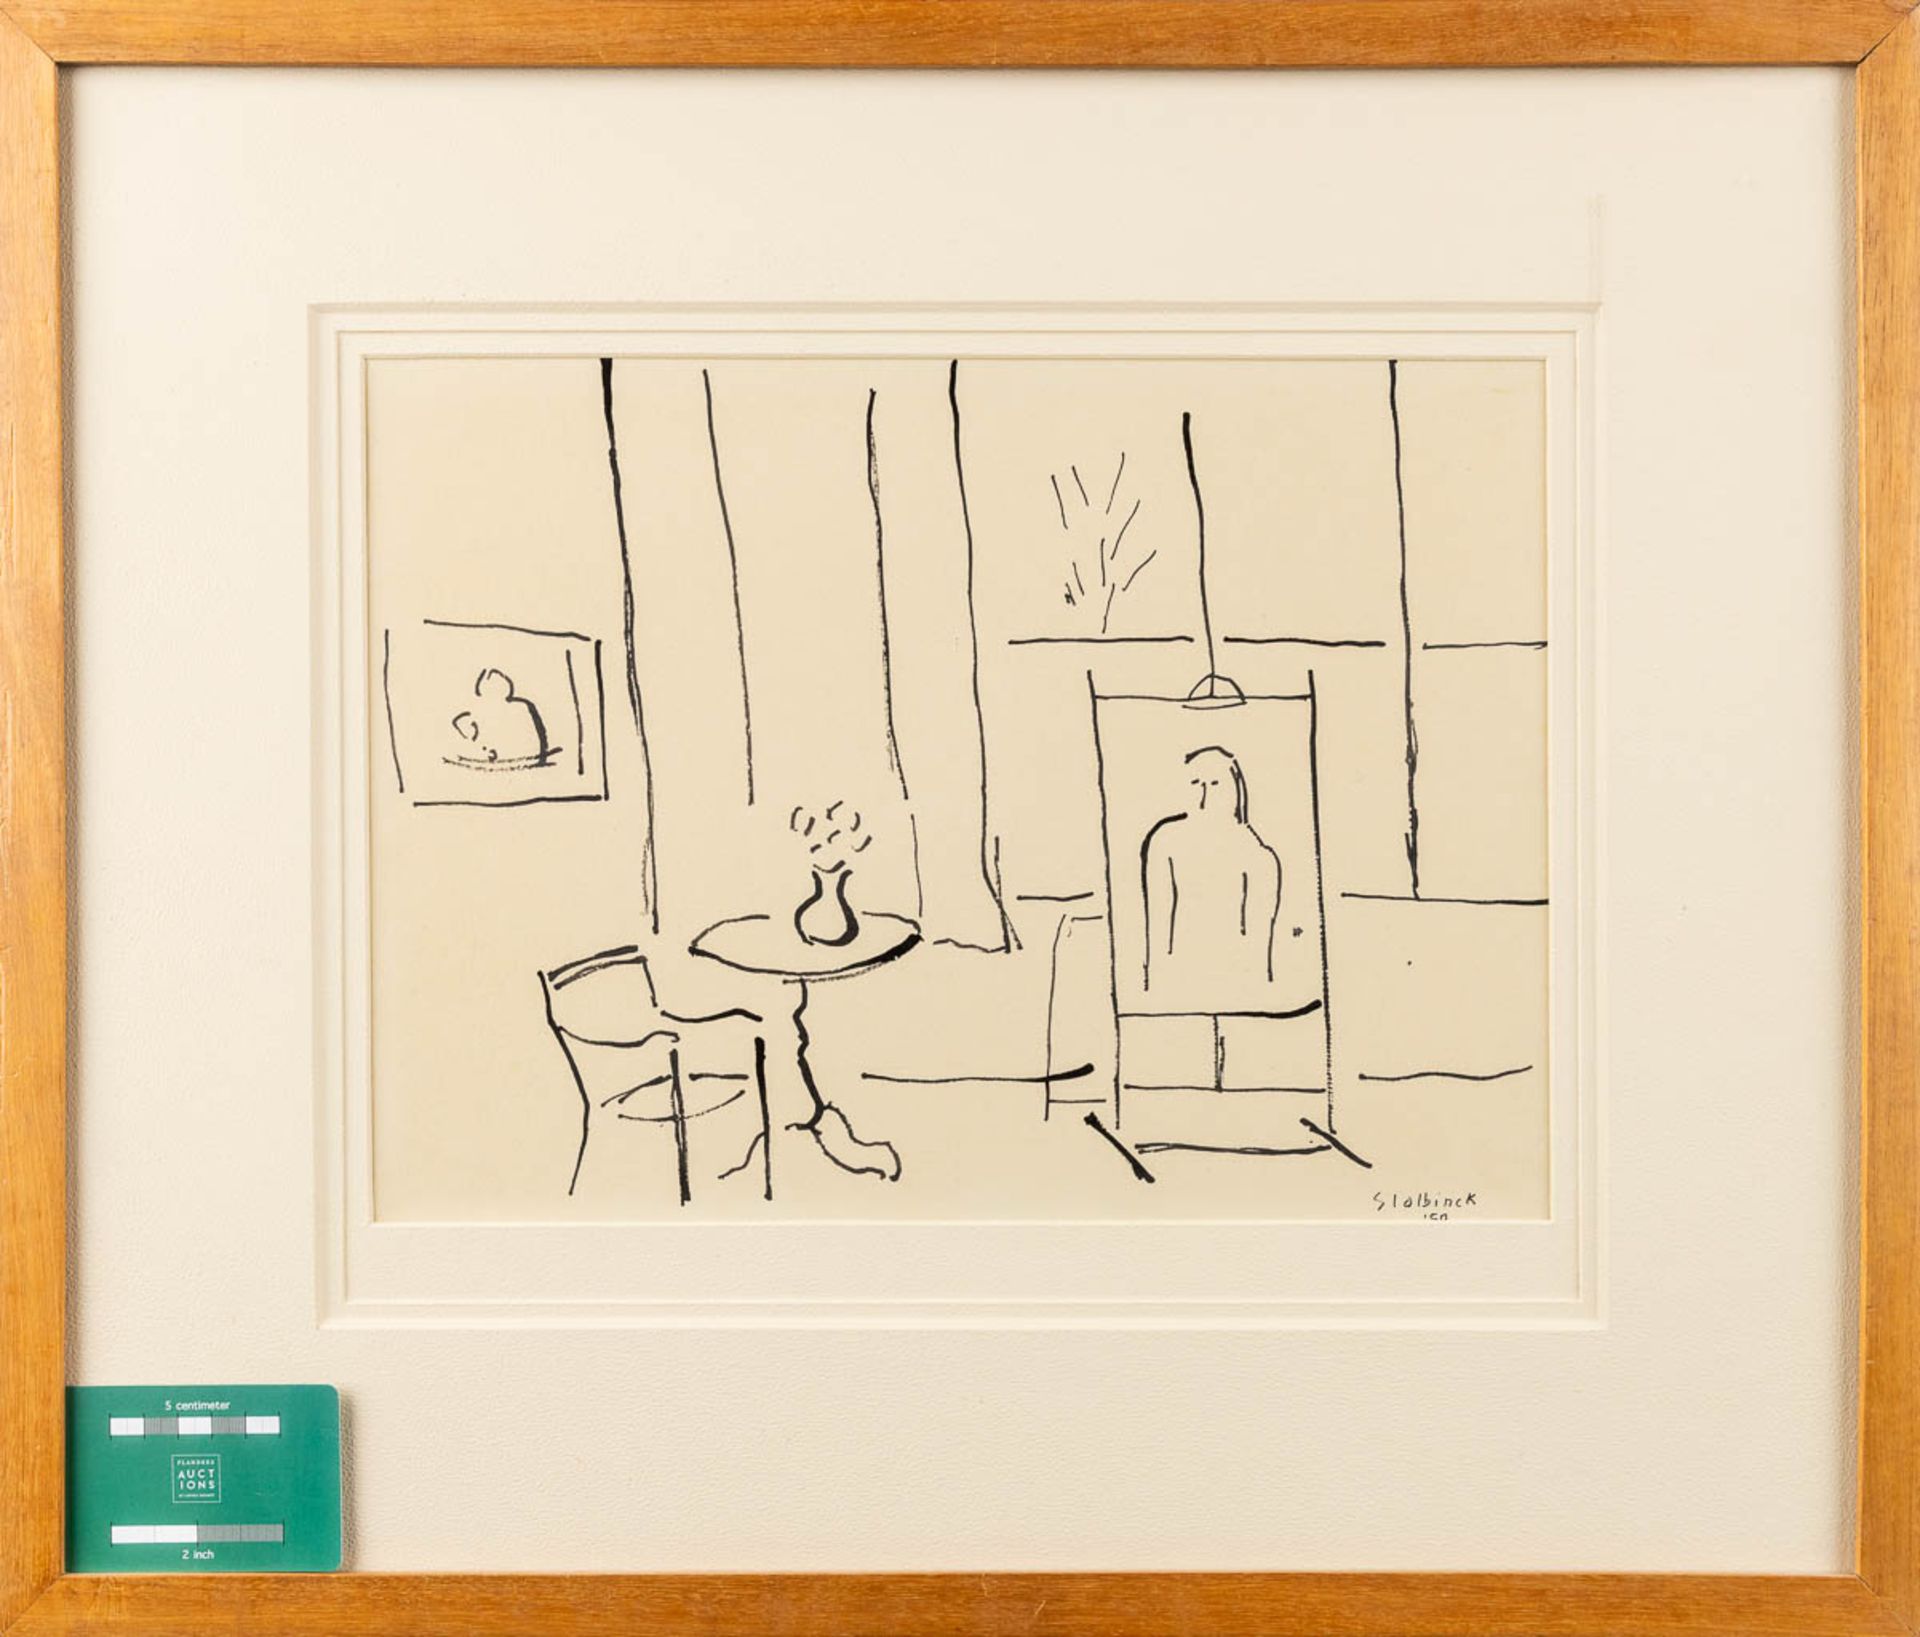 Rik SLABBINCK (1914-1991) 'Interior' a drawing, pencil and Chinese ink on paper. 1950 (W:35 x H: 25 - Image 2 of 5